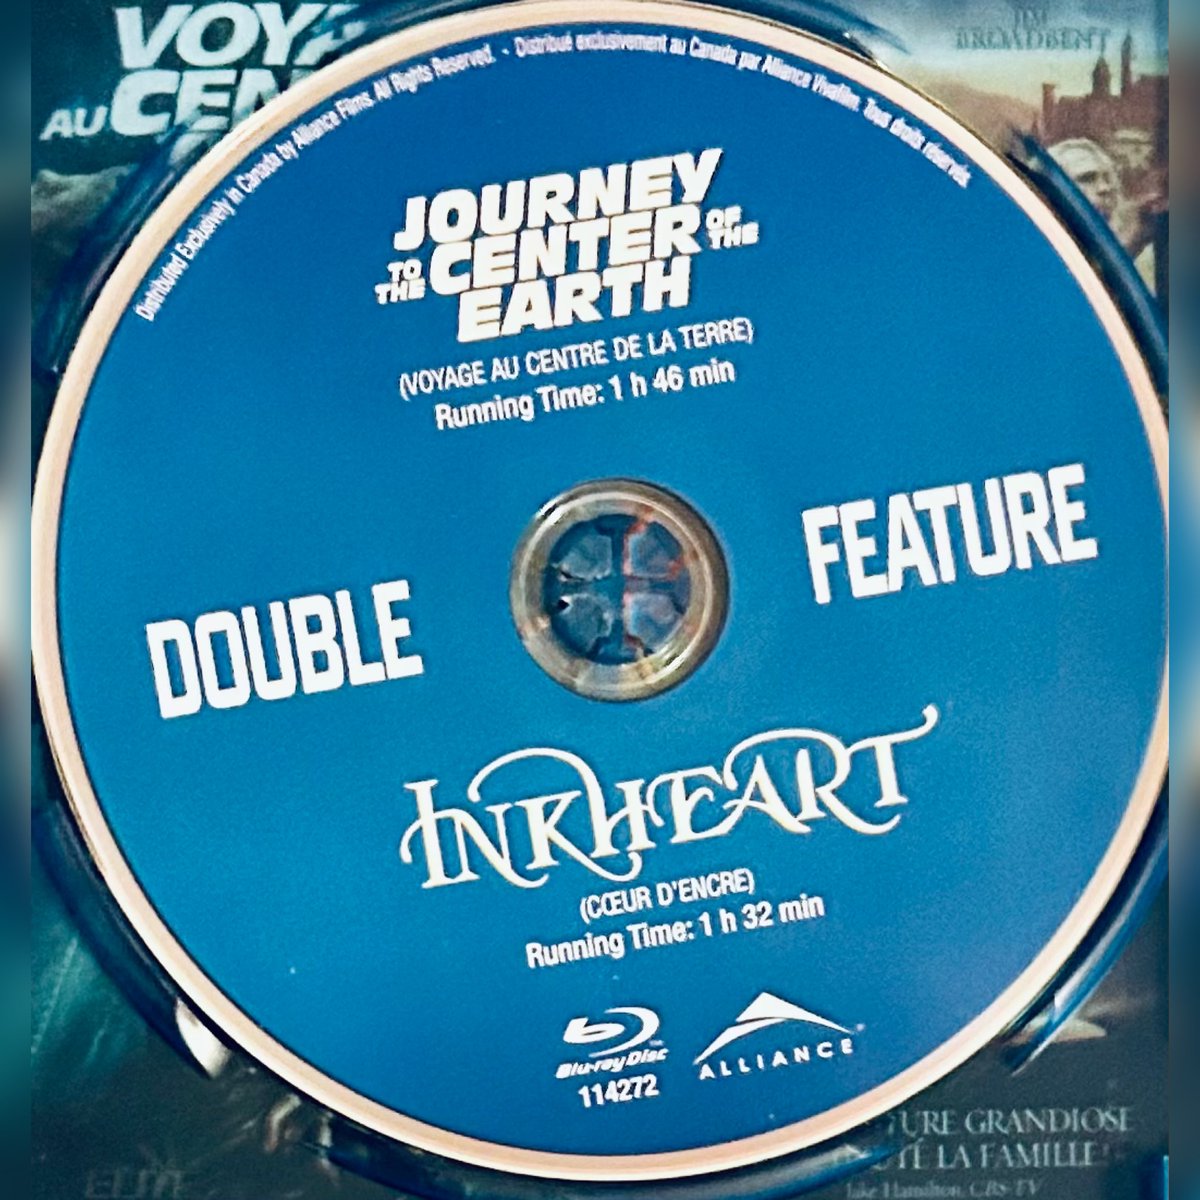 #NewArrival! Journey to the Centre of the Earth/Inkheart (Blu-ray, 2010) Brendan Fraser OOP

rareflicksplus.com/all-products/o…

#JourneytotheCentreoftheEarth #Inkheart #BrendanFraser #OOP #DoubleFeature #Bluray #Blurays #PhysicalMedia #ActionMovie #AdventureMovie